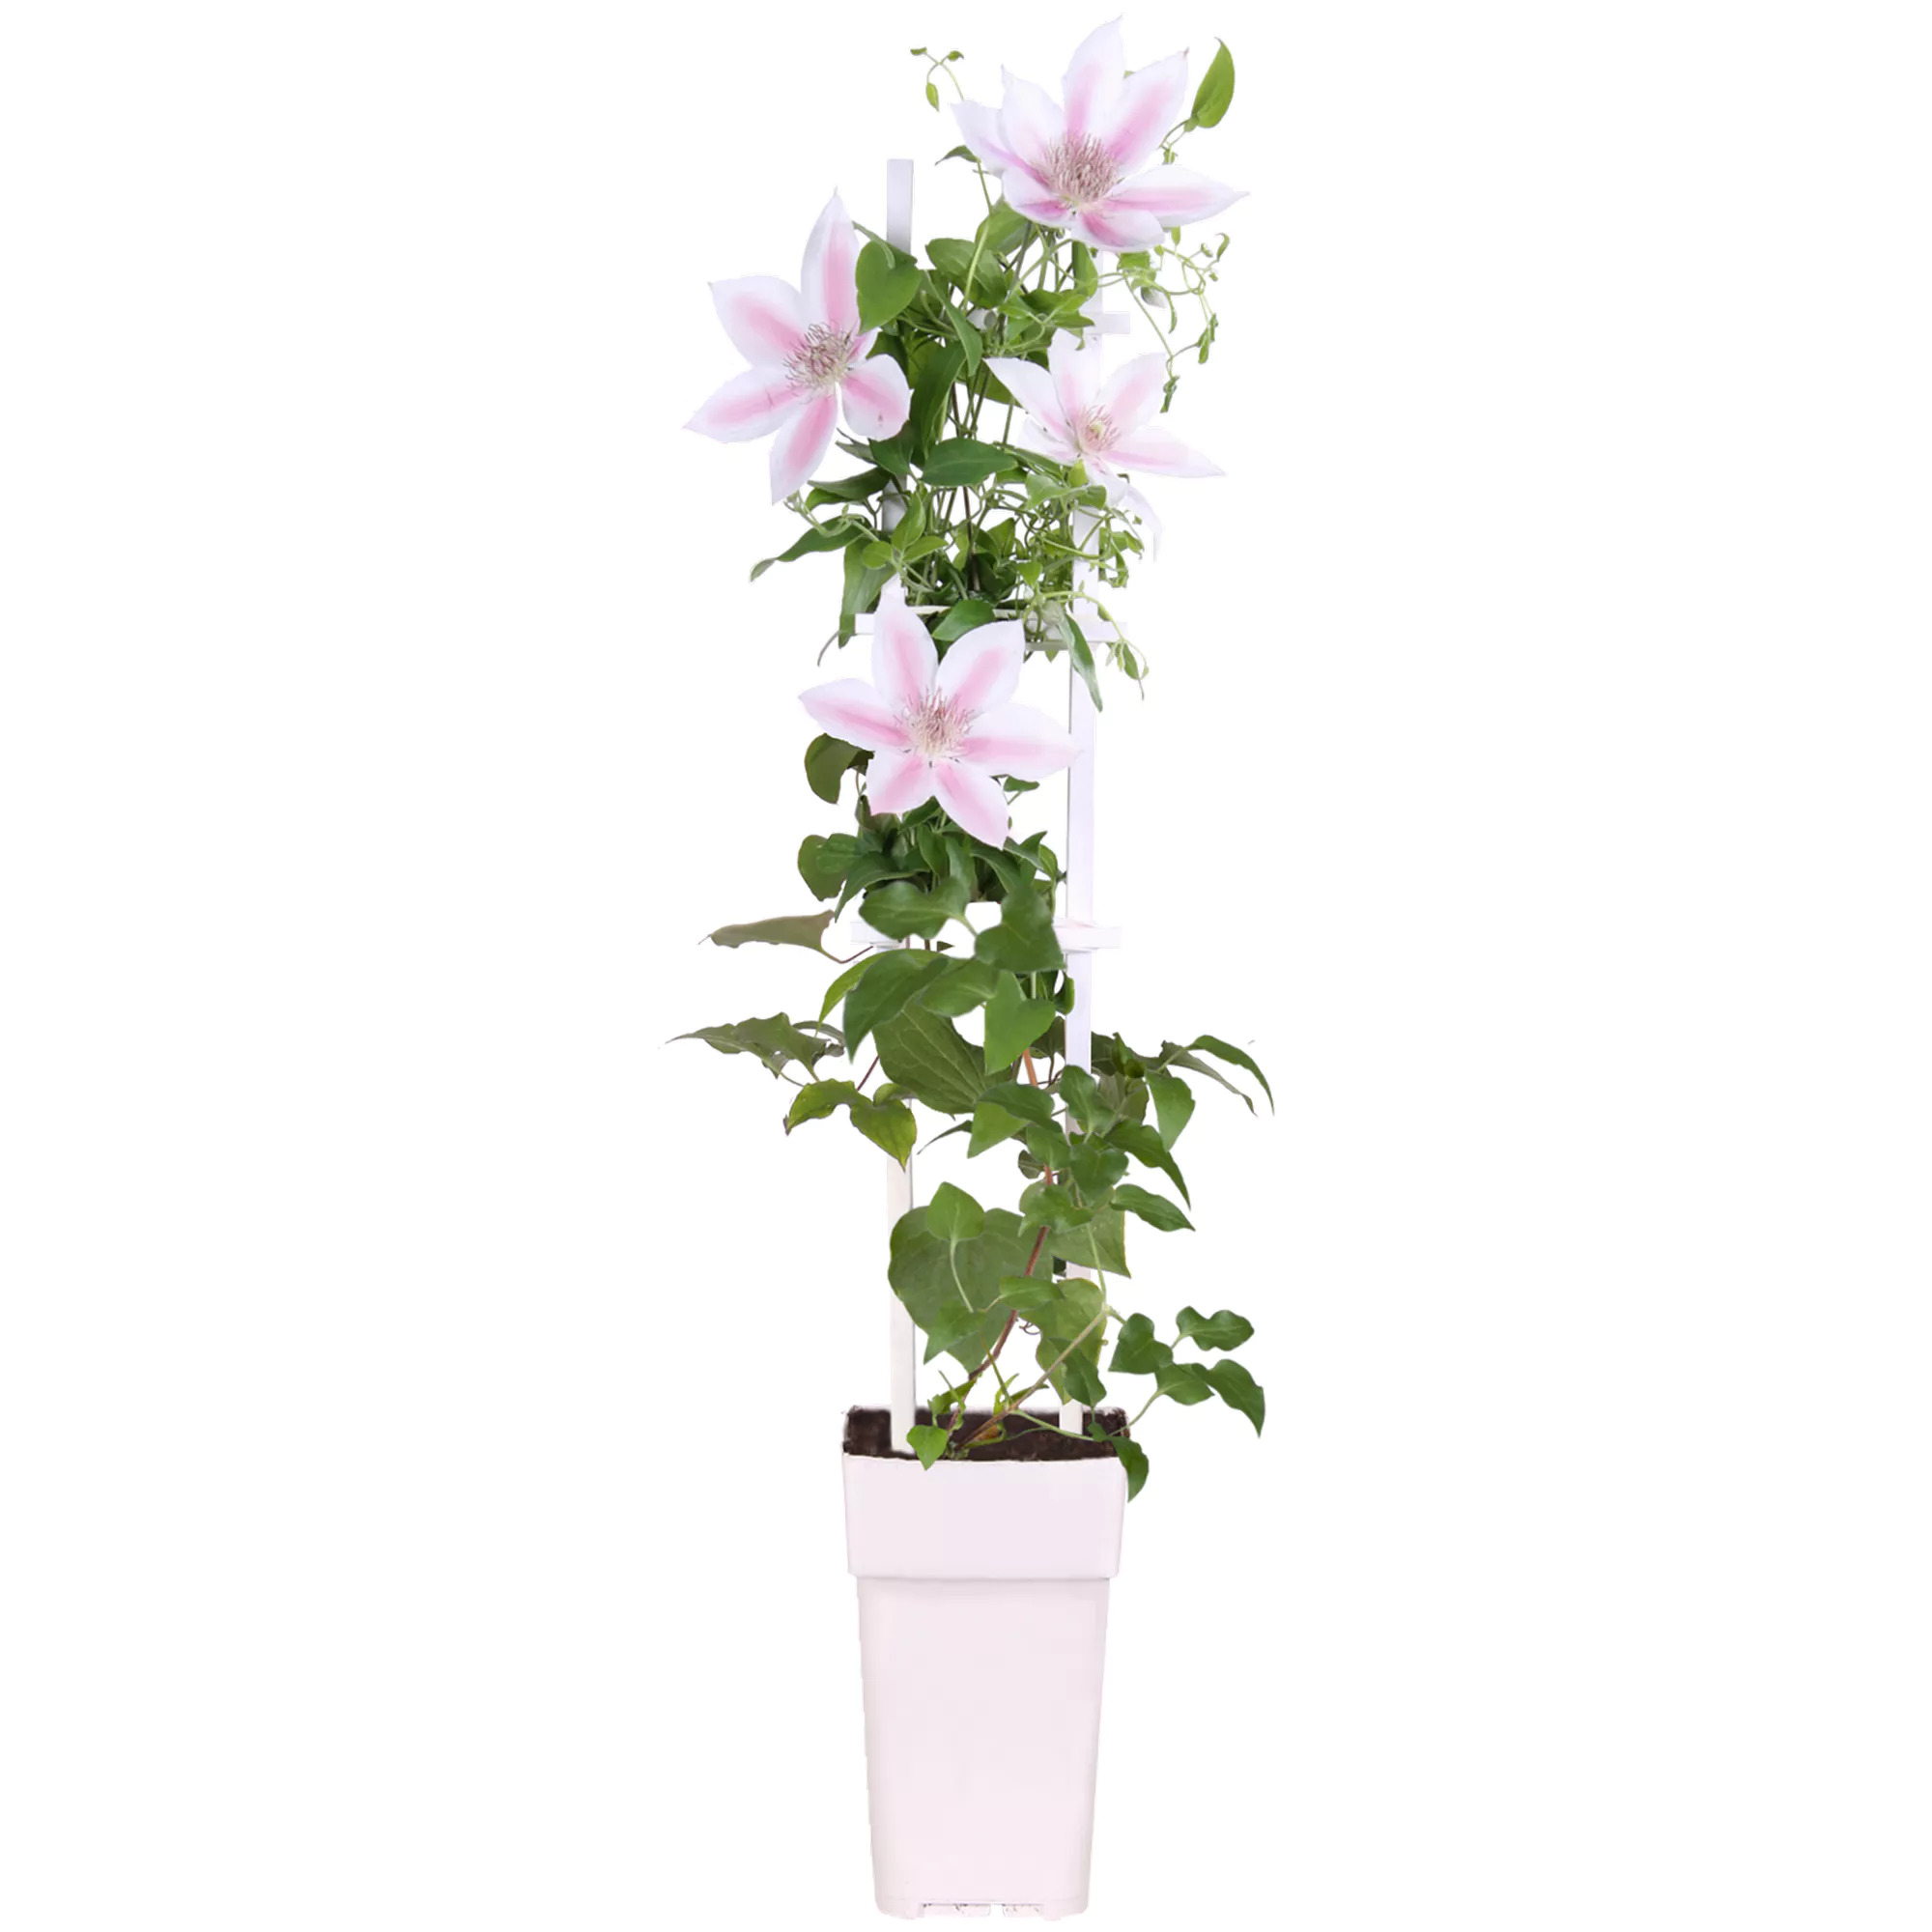 Clematis Standard zweifarbig 14 cm Topf + product picture